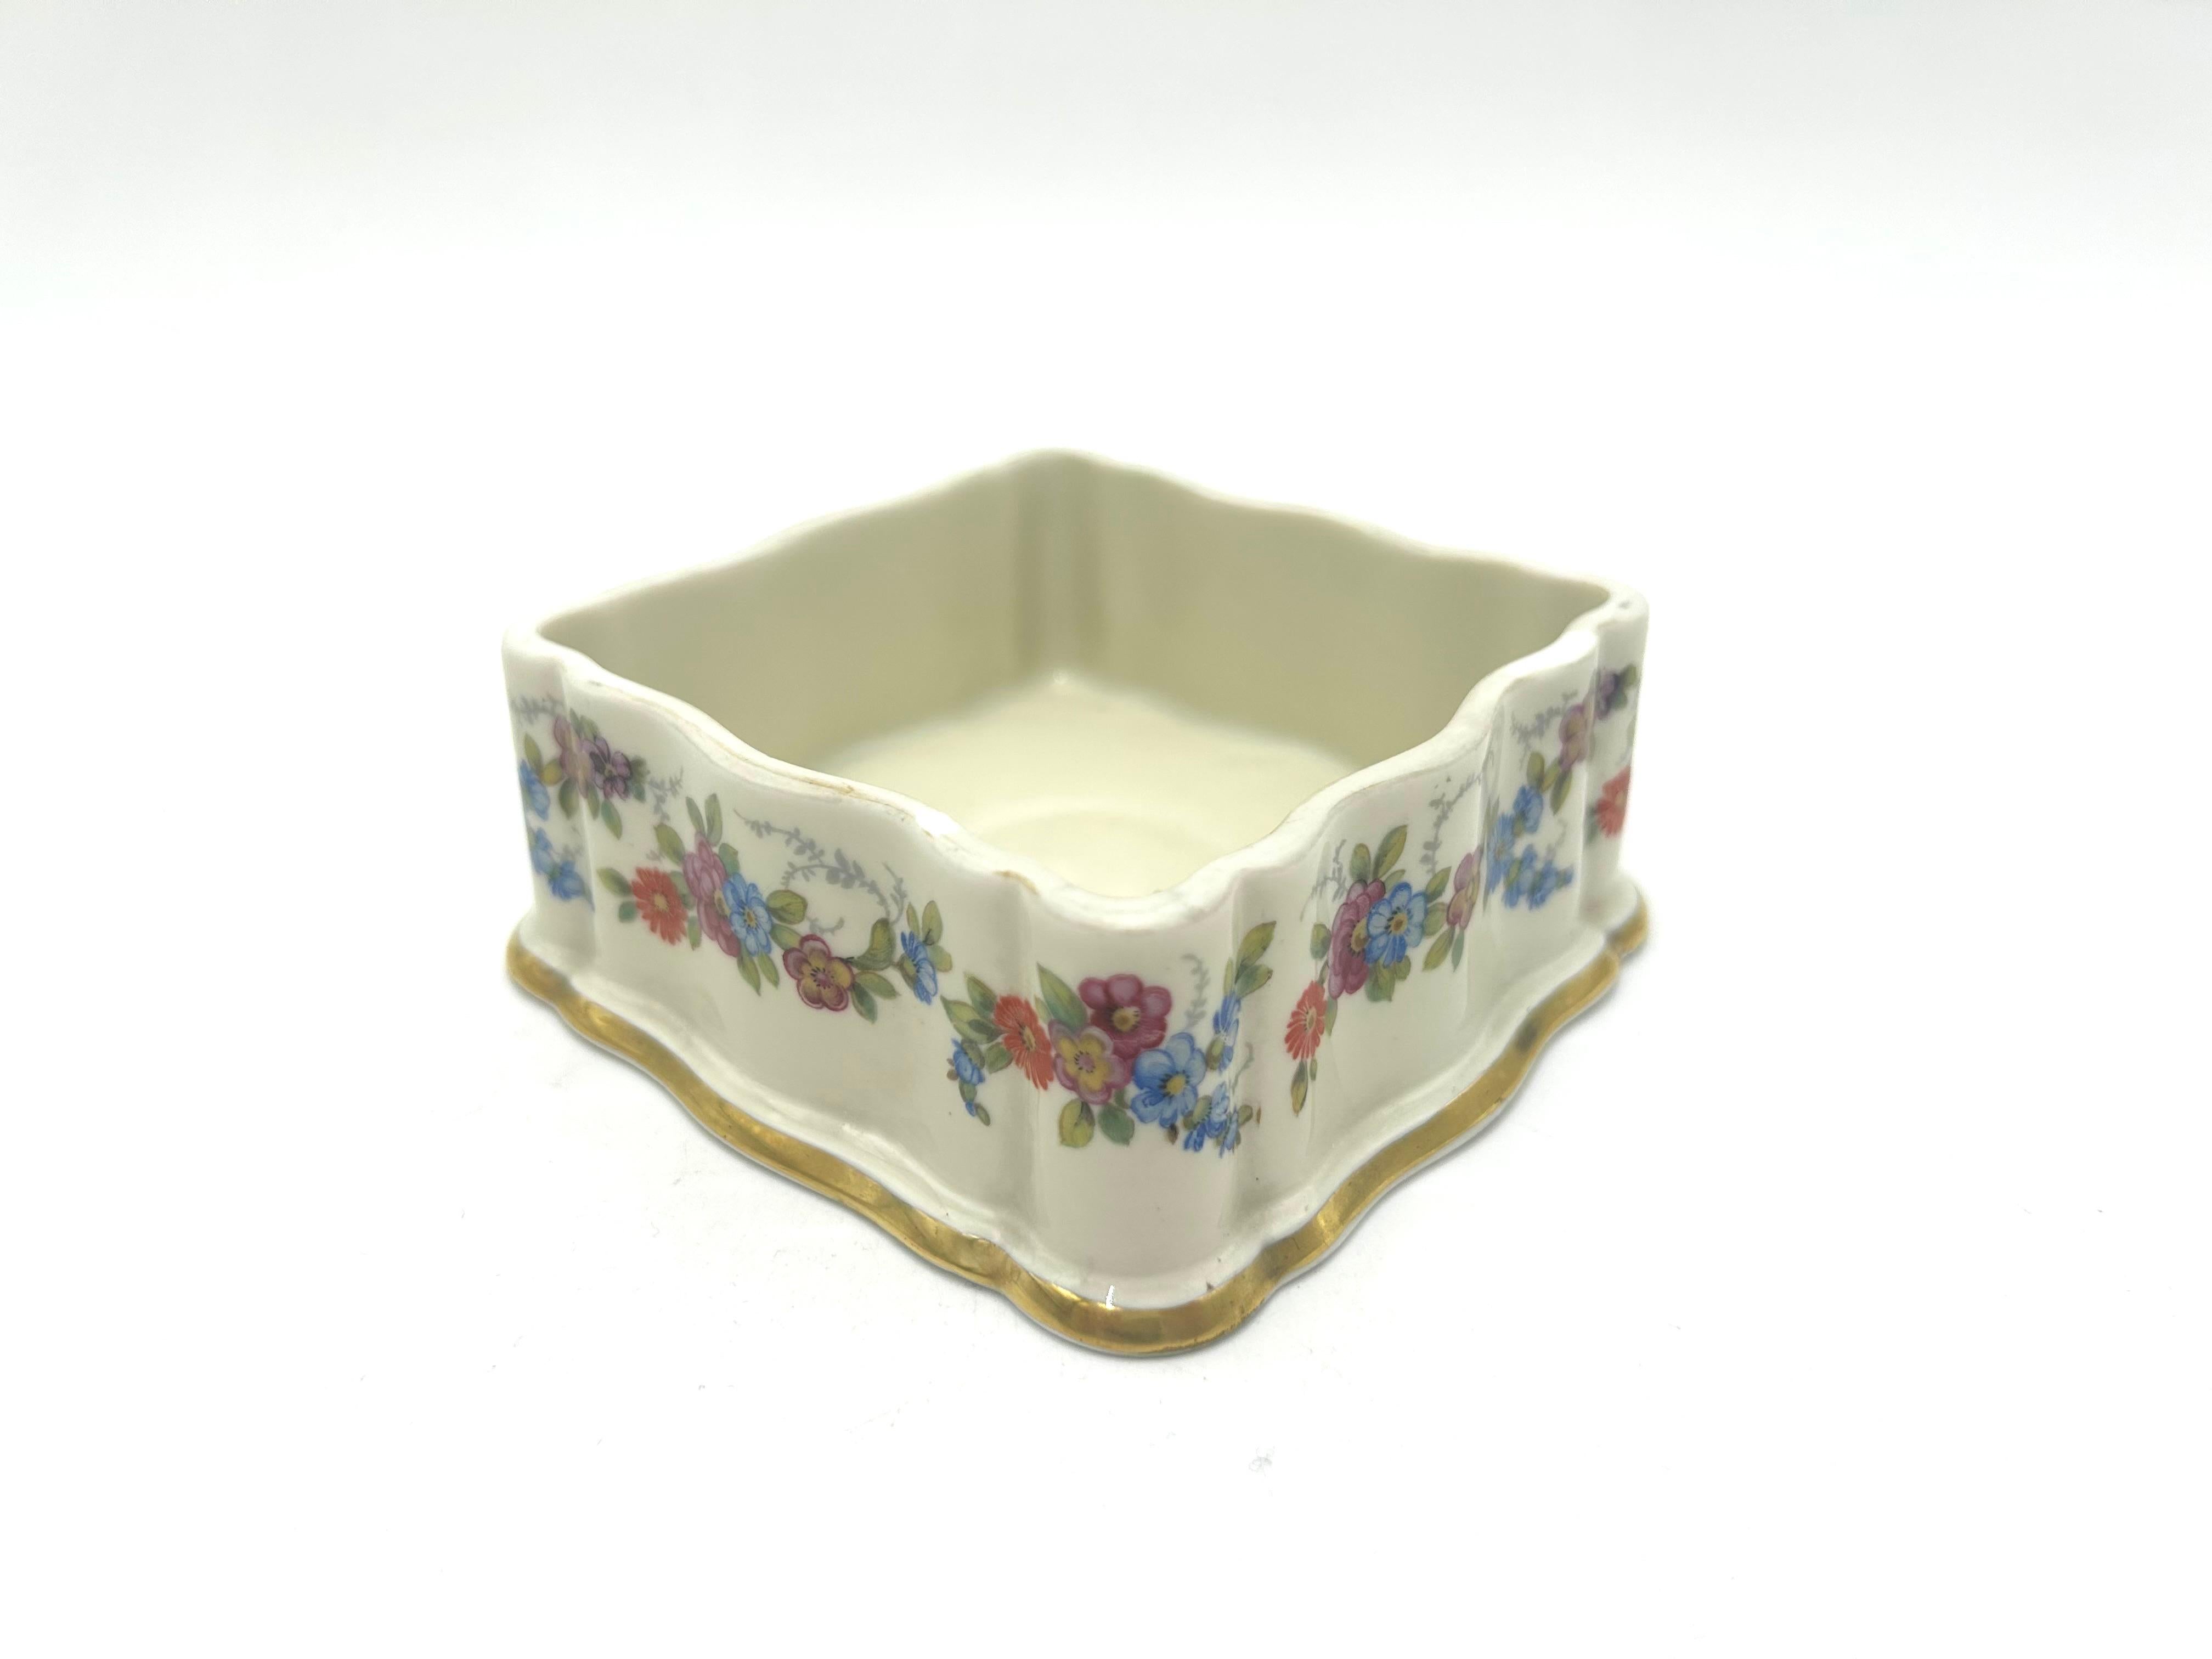 Porcelain Casket Jewellery Box, Rosenthal Chippendale, Germany, 1942 For Sale 2